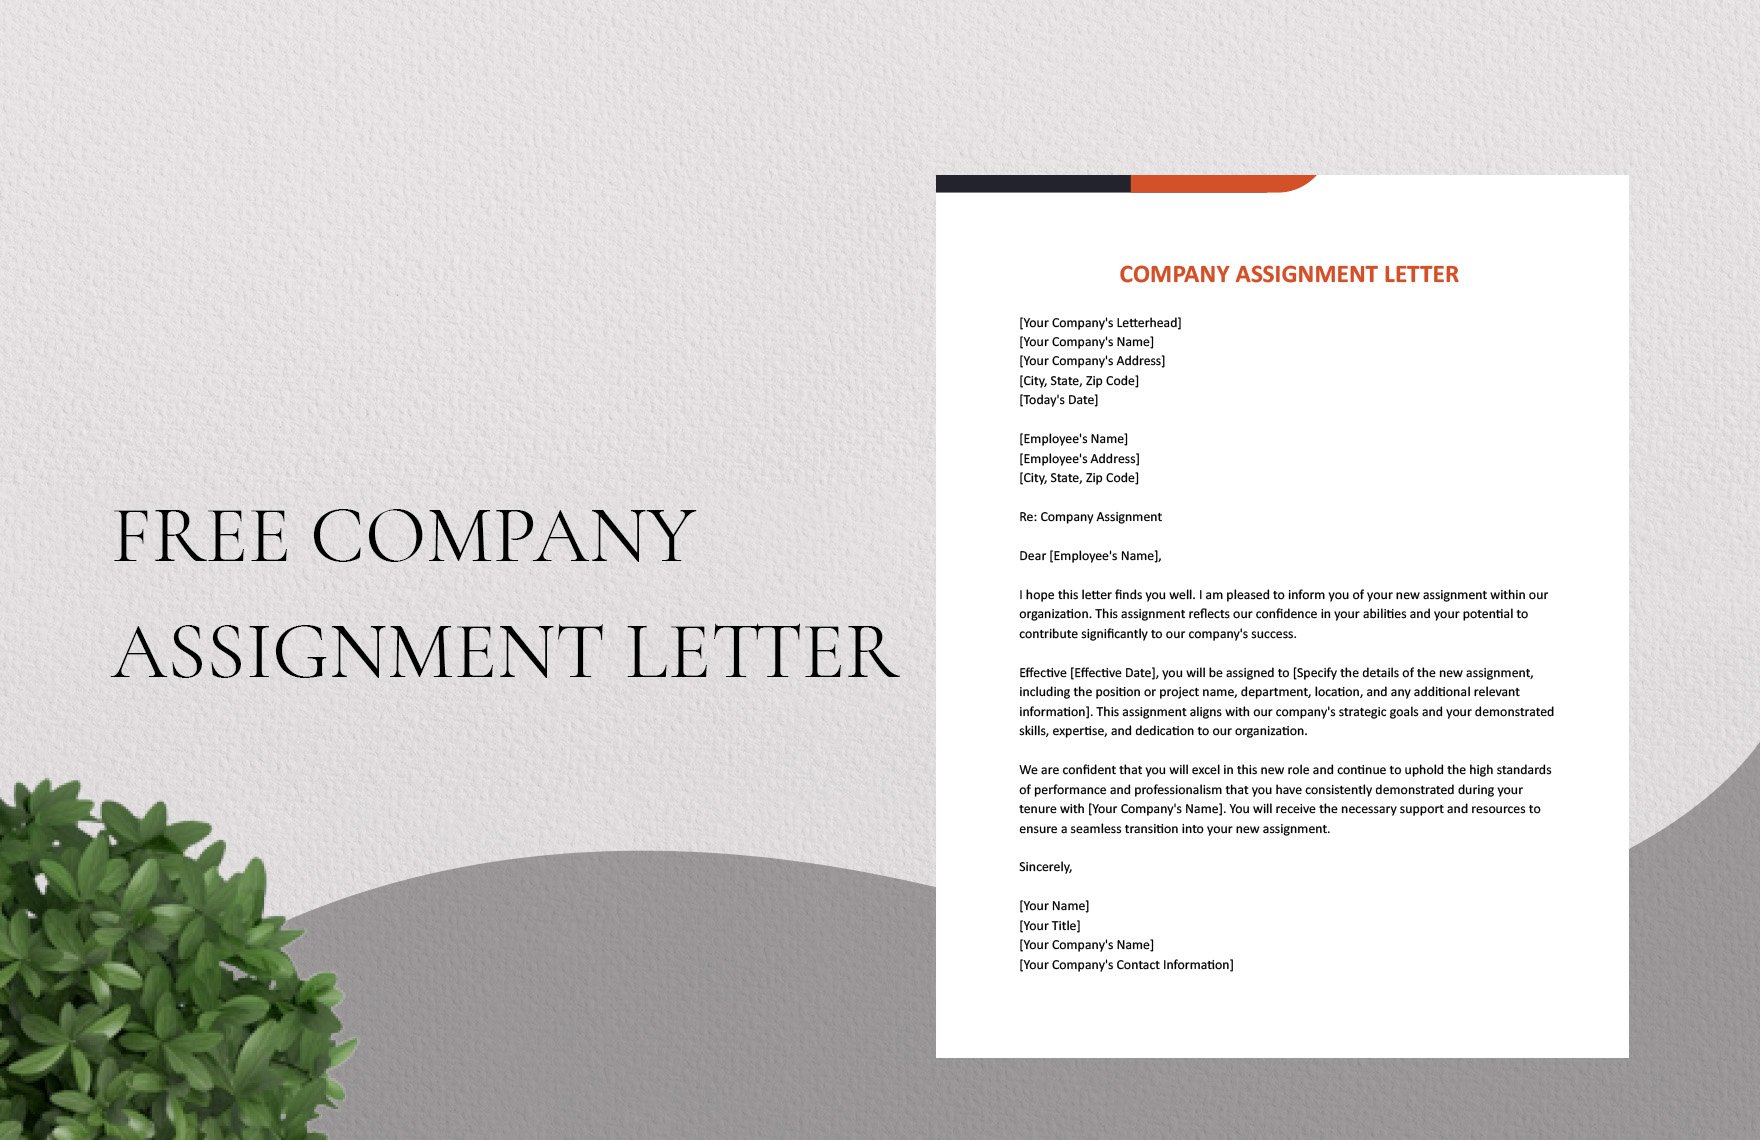 Company Assignment Letter